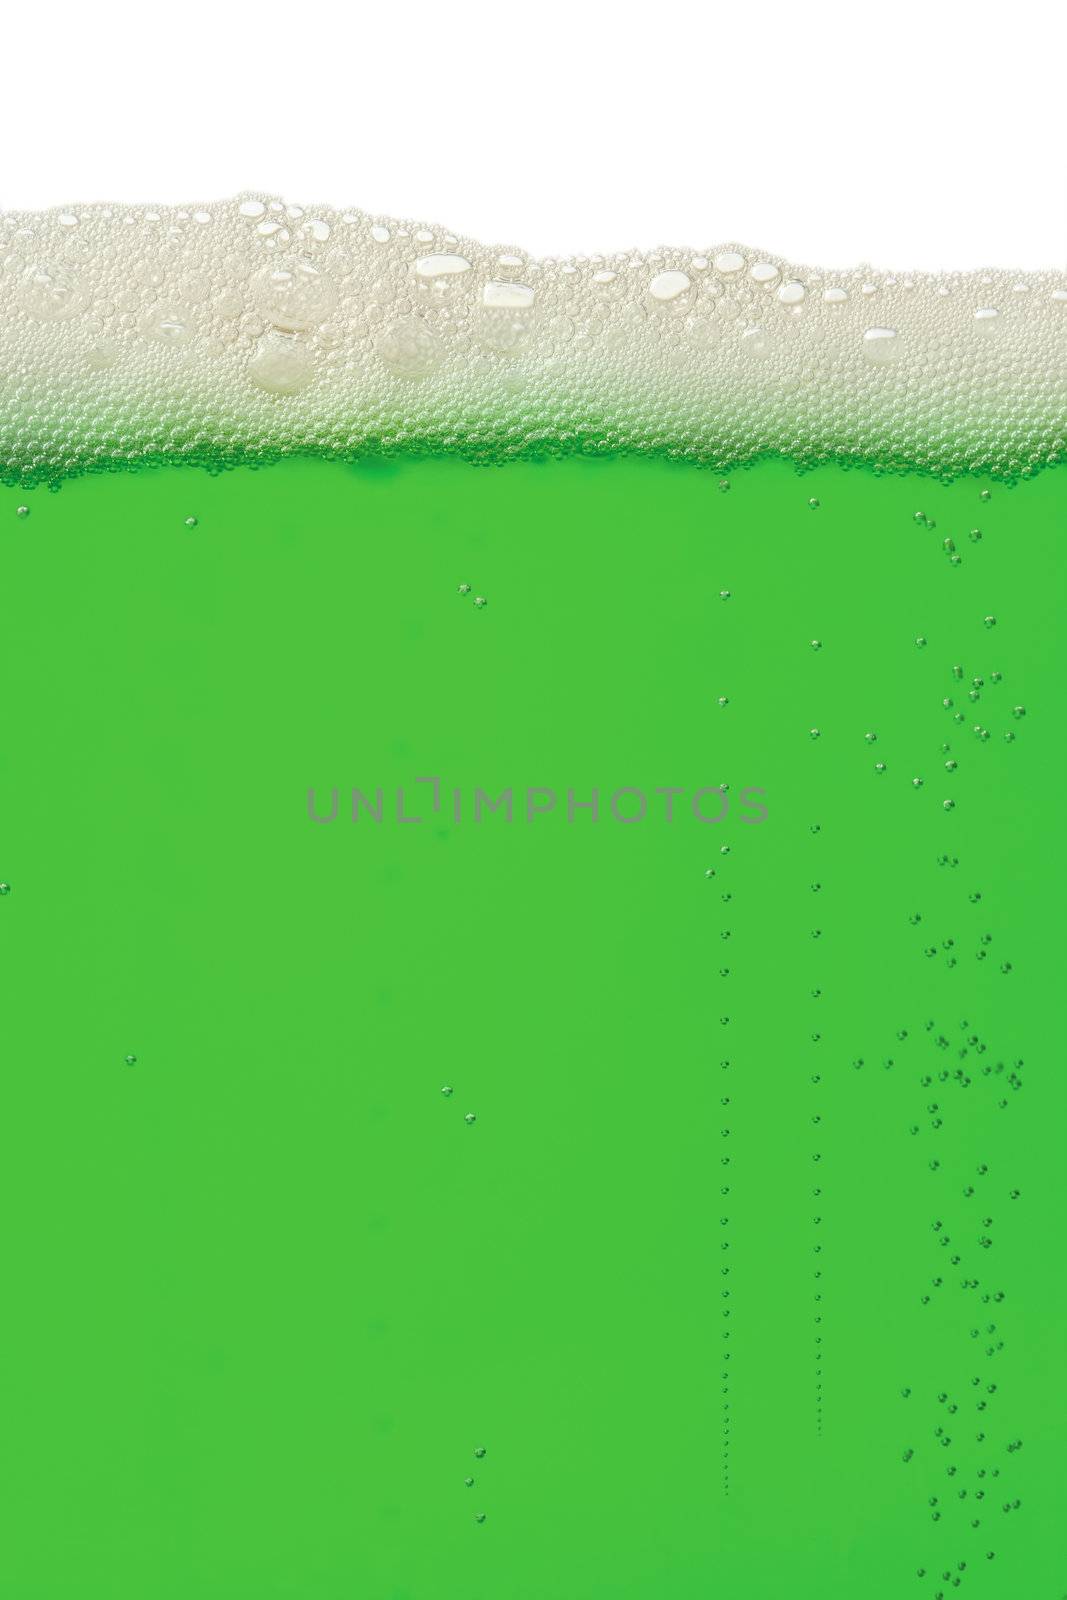 A macro background image of green beer for St. Patrick's Day.
